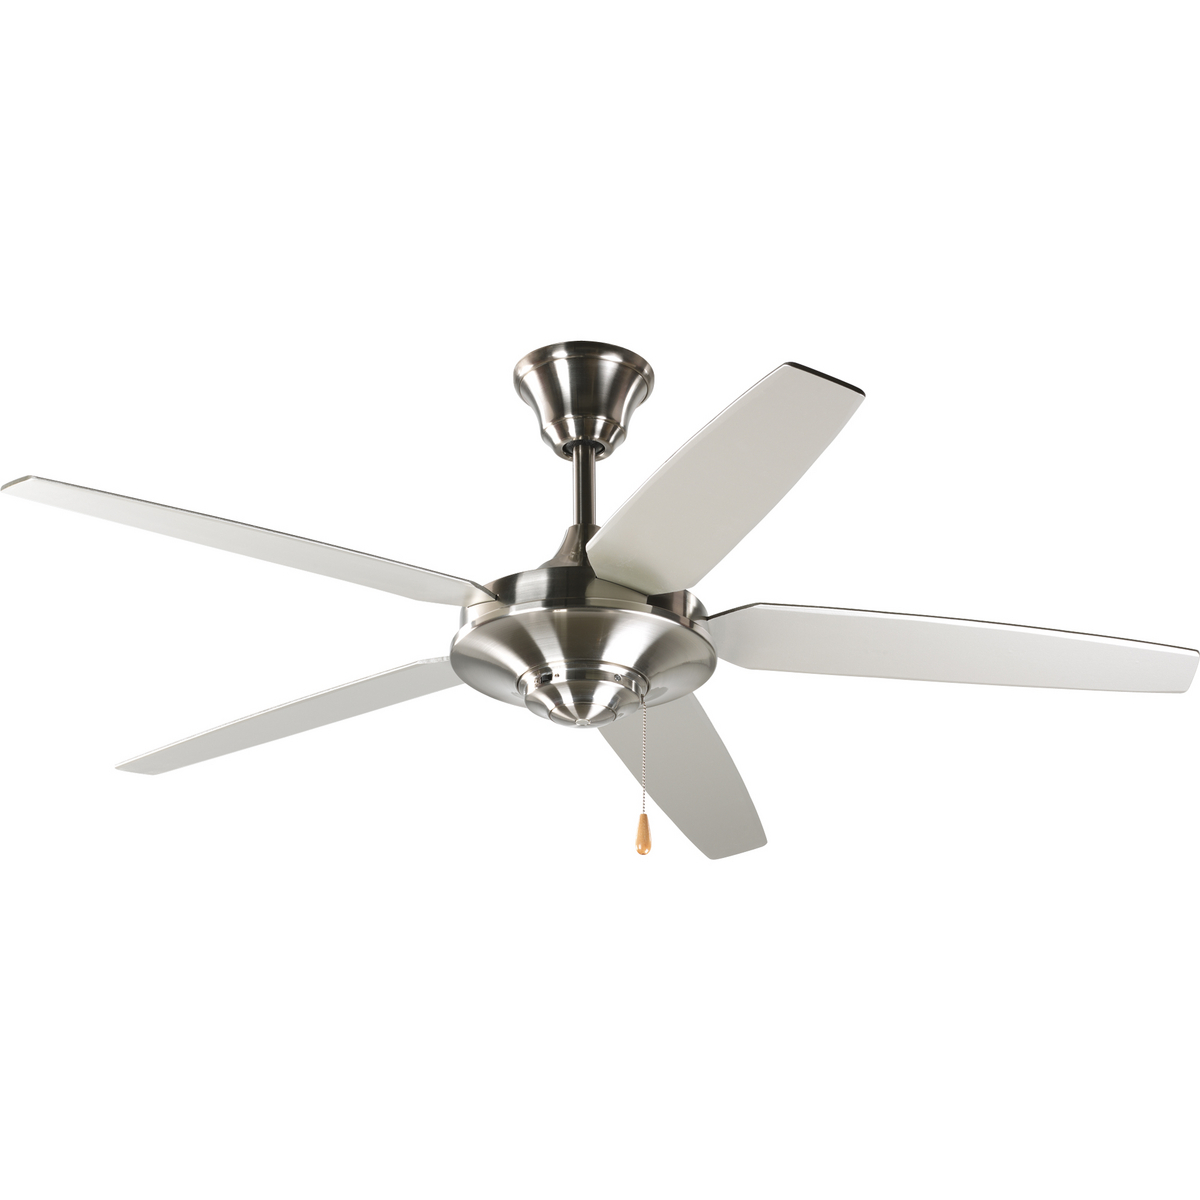 54 in five-blade fan with reversible Silver/Natural Cherry blades and a Brushed Nickel finish. The AirPro Signature ceiling fan offers great performance and value. This contemporary styled fan features a powerful, 3-speed motor that can be reversed to provide year-round comfort. Includes innovative canopy system that can be installed on vaulted ceilings up to 12:12 pitch. A 1 in x 6 in downrod is included, however, longer downrods can be ordered separately. Can be used to comply with California Title 20.